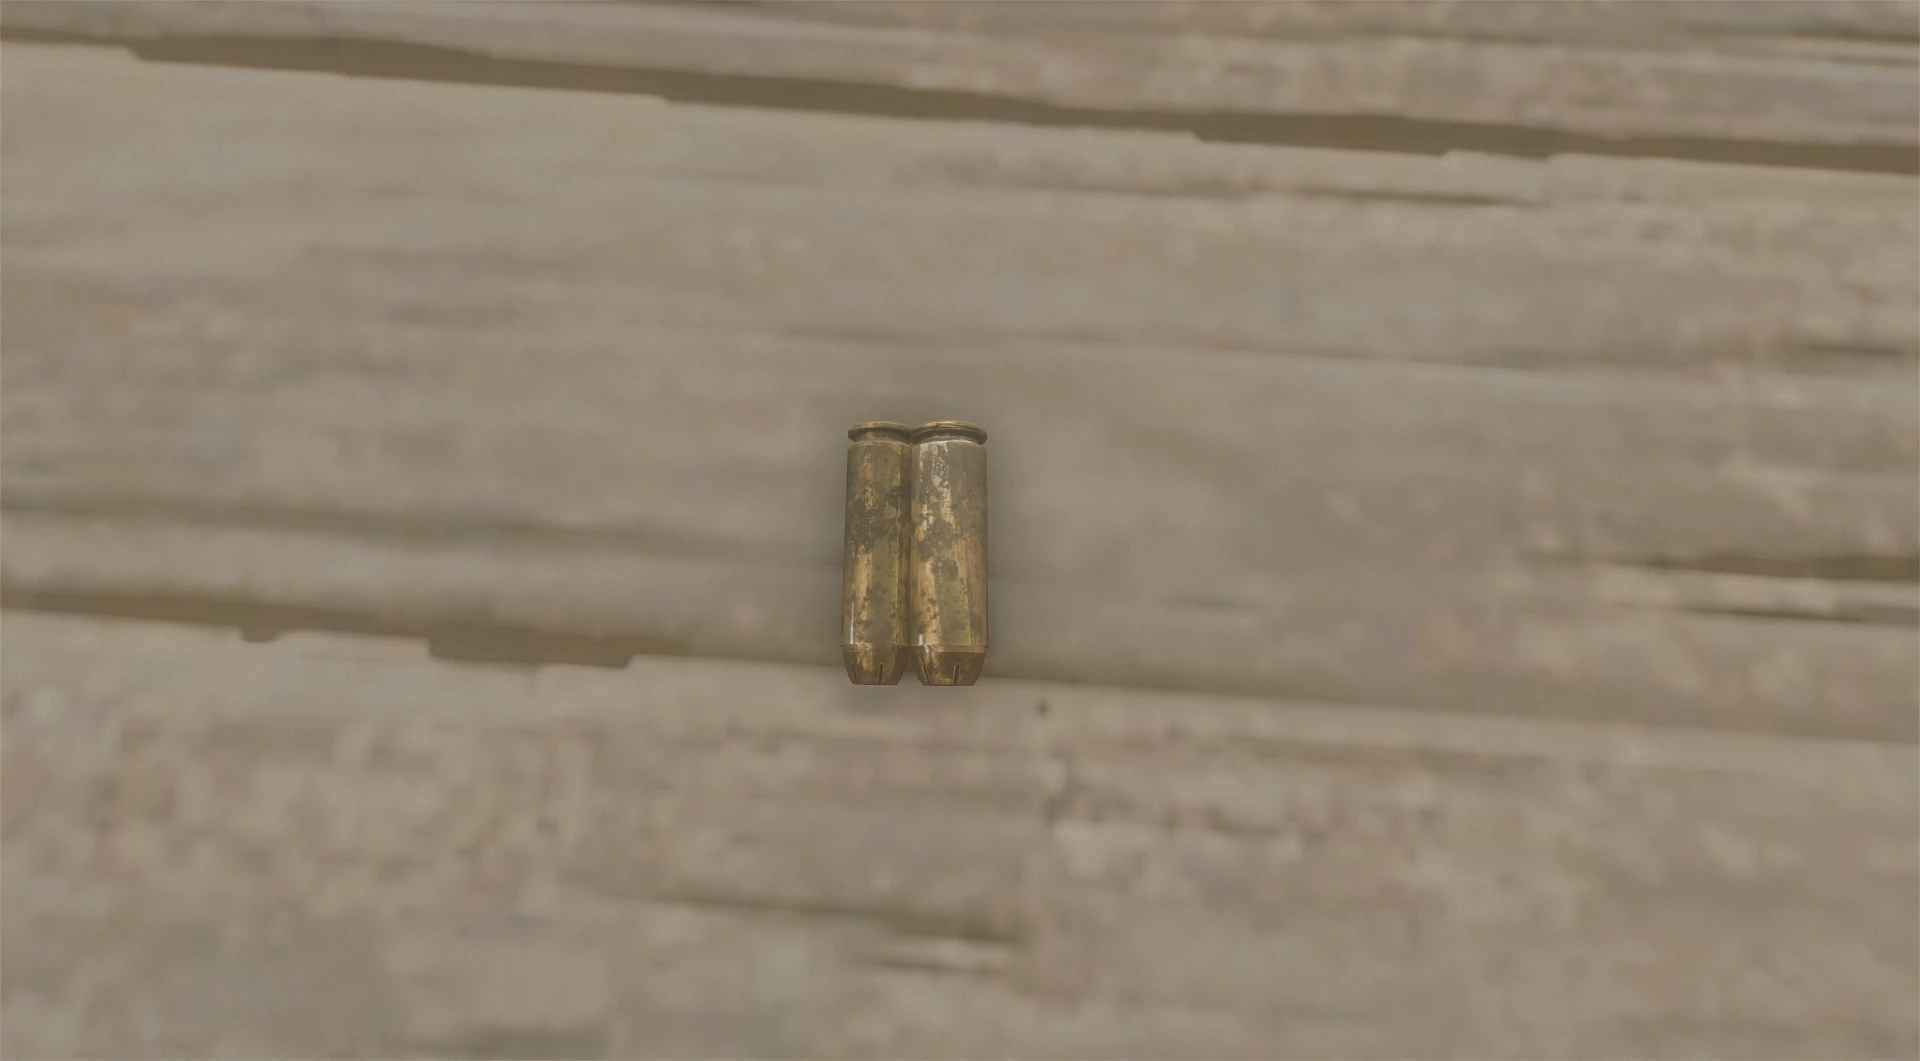 where can i find 5mm ammo in fallout 4